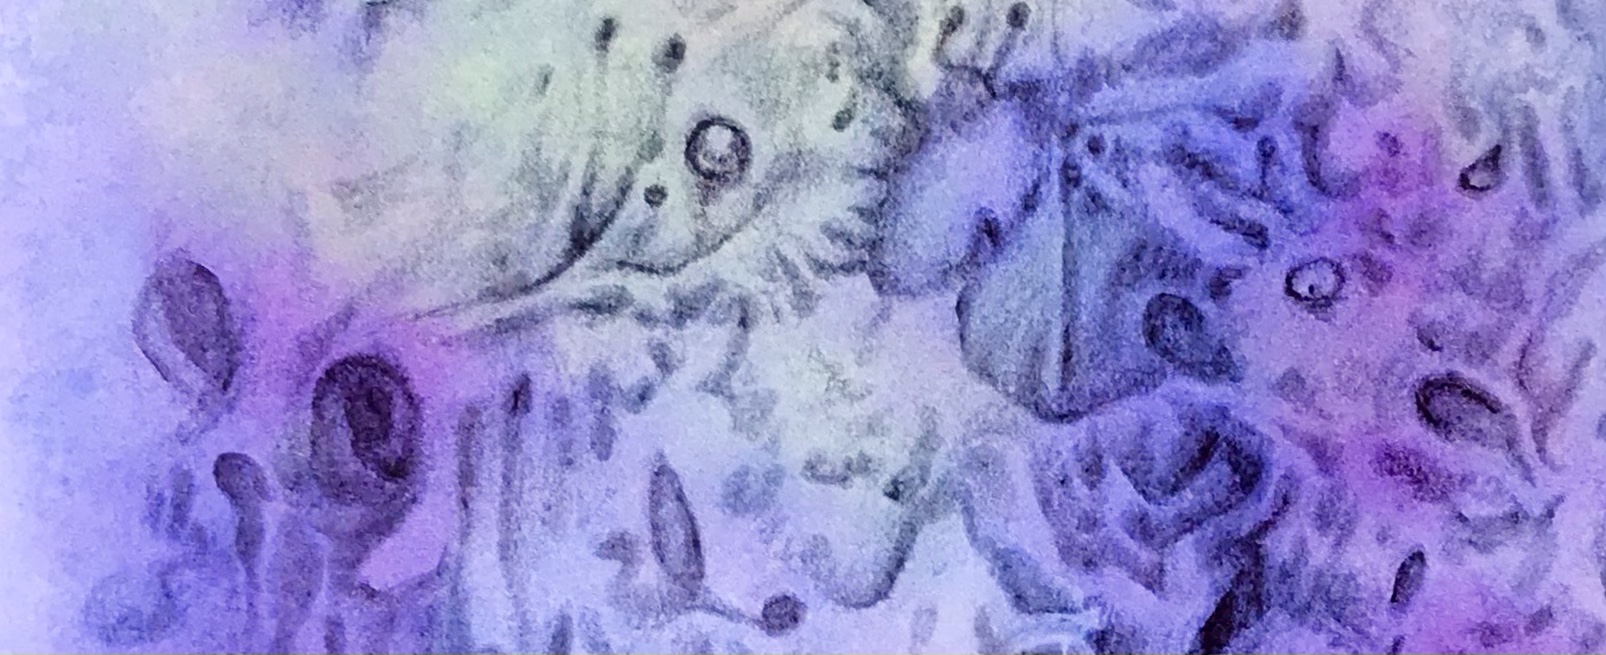 Detail of a biomorphic drawing in graphite pencil over an abstract watercolor painting by MJ Seal